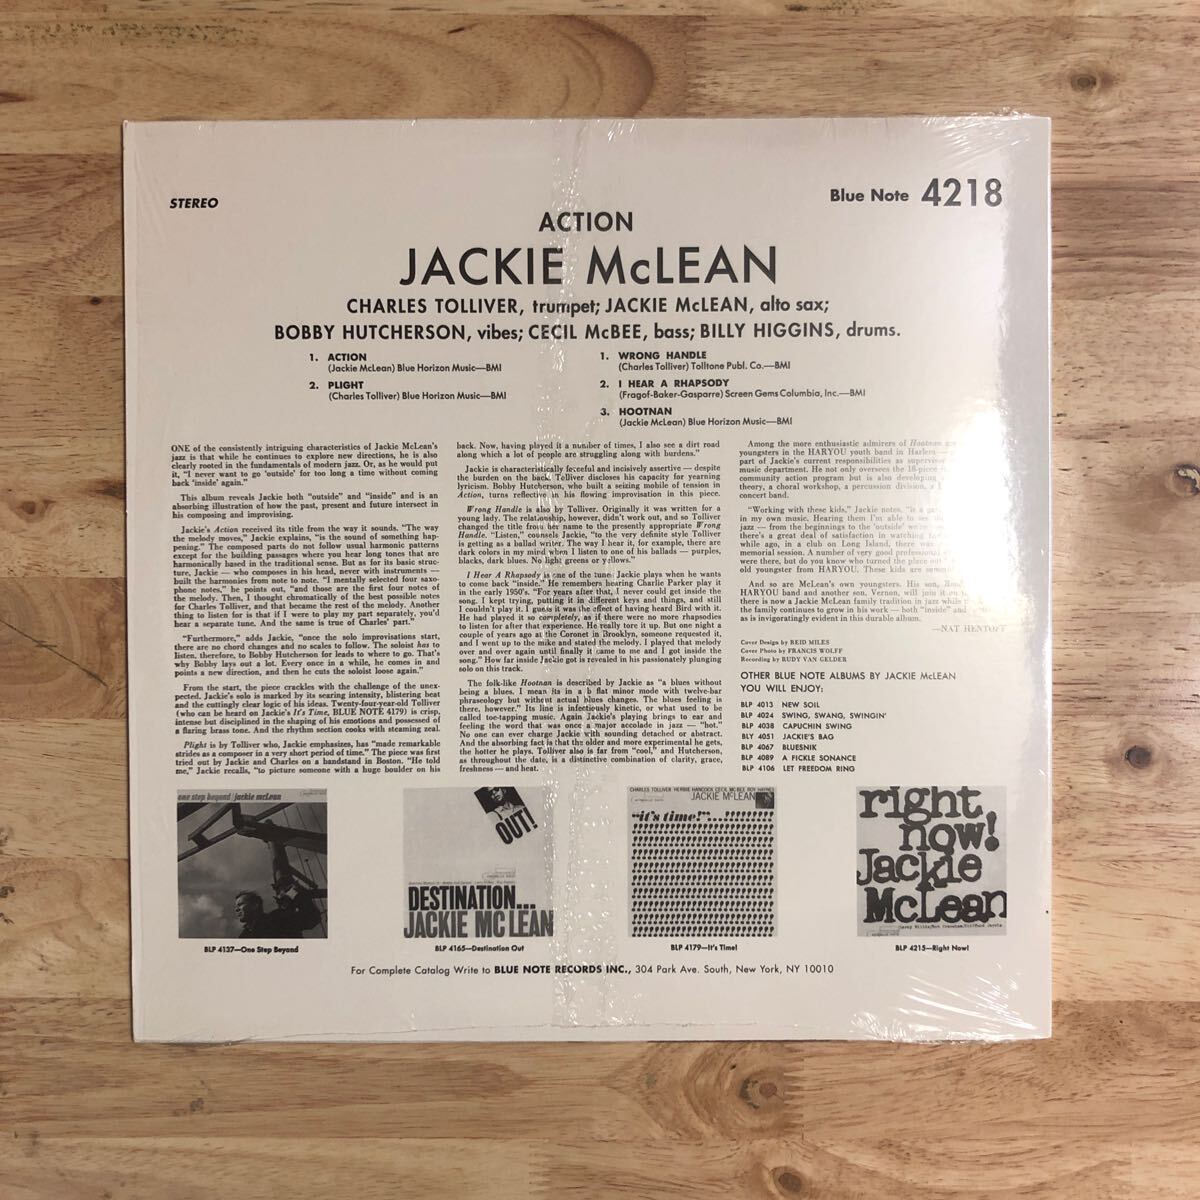 LP 美品 JACKIE McLEAN/ACTION[US盤:BLUE NOTE67年作:180g盤:CHARLES TOLLIVER(tp)BOBBY HUTCHERSON(vib)CECIL McBEE(b)BILLY HIGGINS(dr)]の画像2